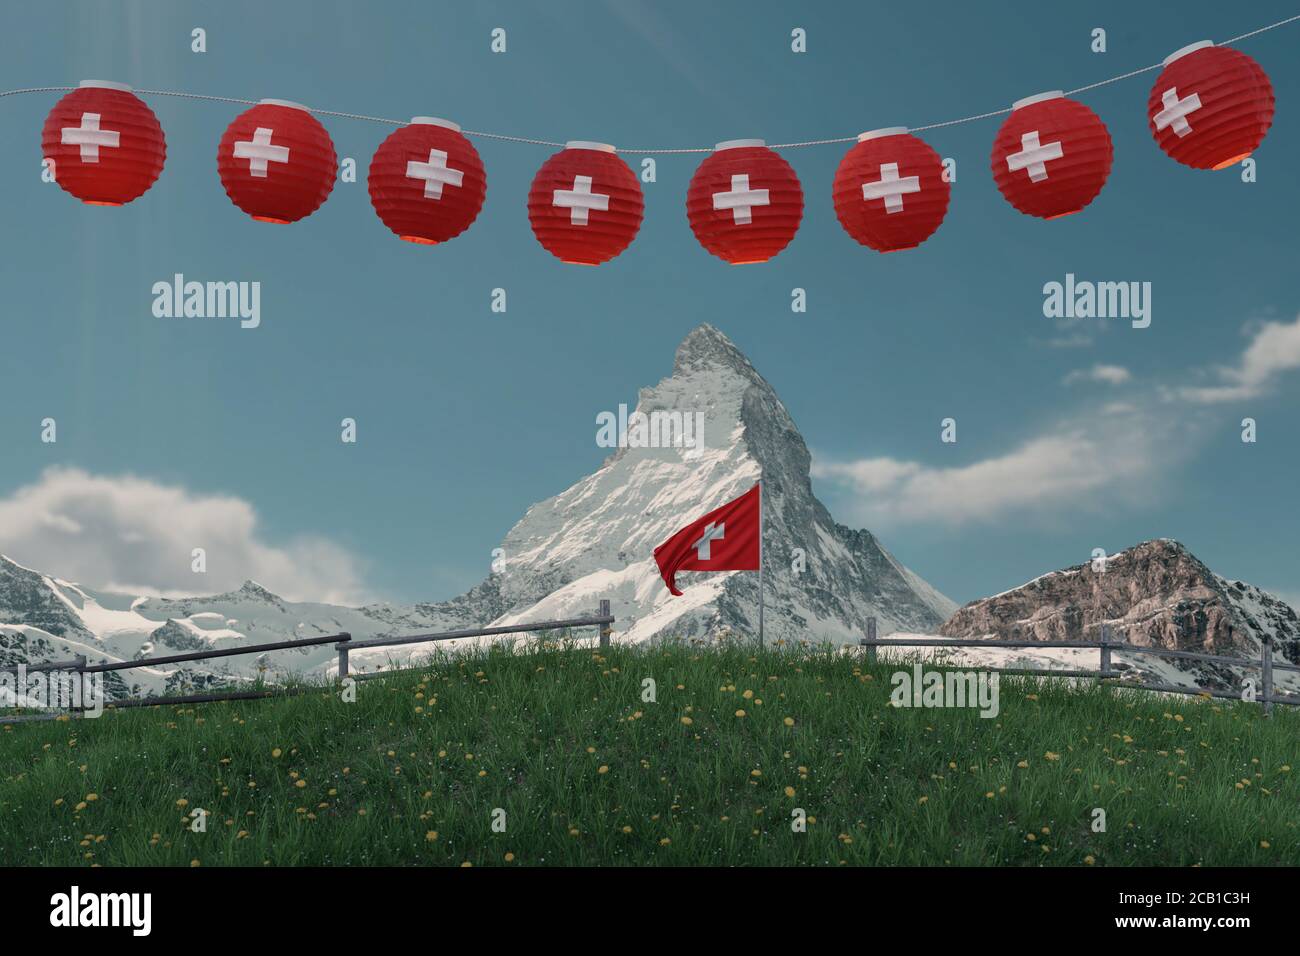 3d rendering of hanging lighten lampion covered with swiss flag over mountain pasture with view to the matterhorn and swiss flag Stock Photo